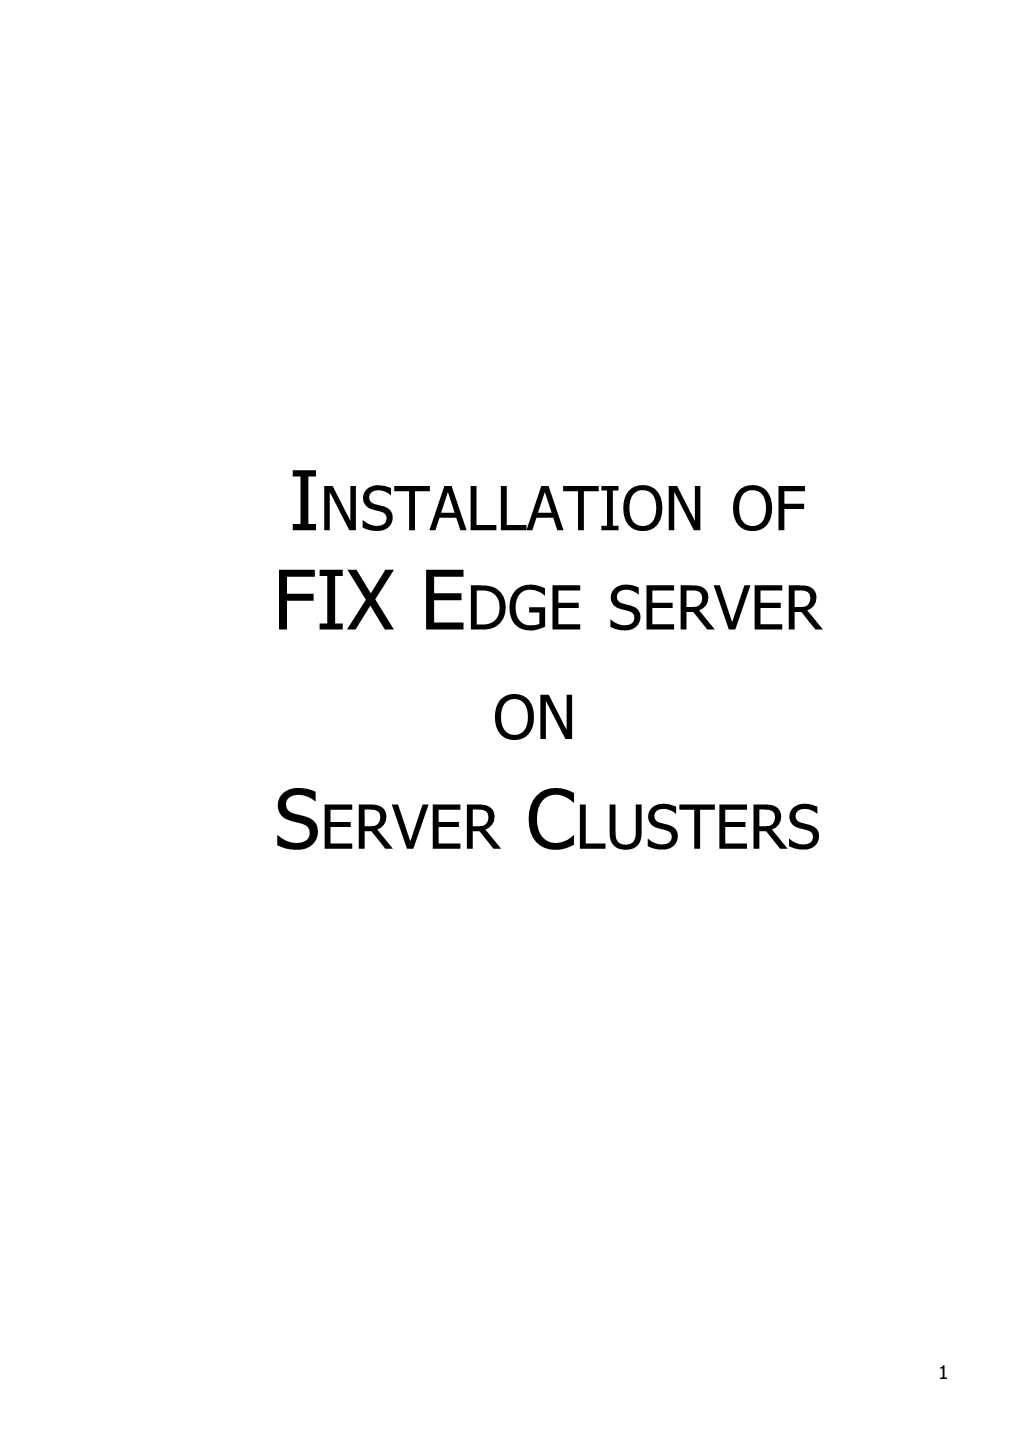 Quick Start Guide for Server Clusters